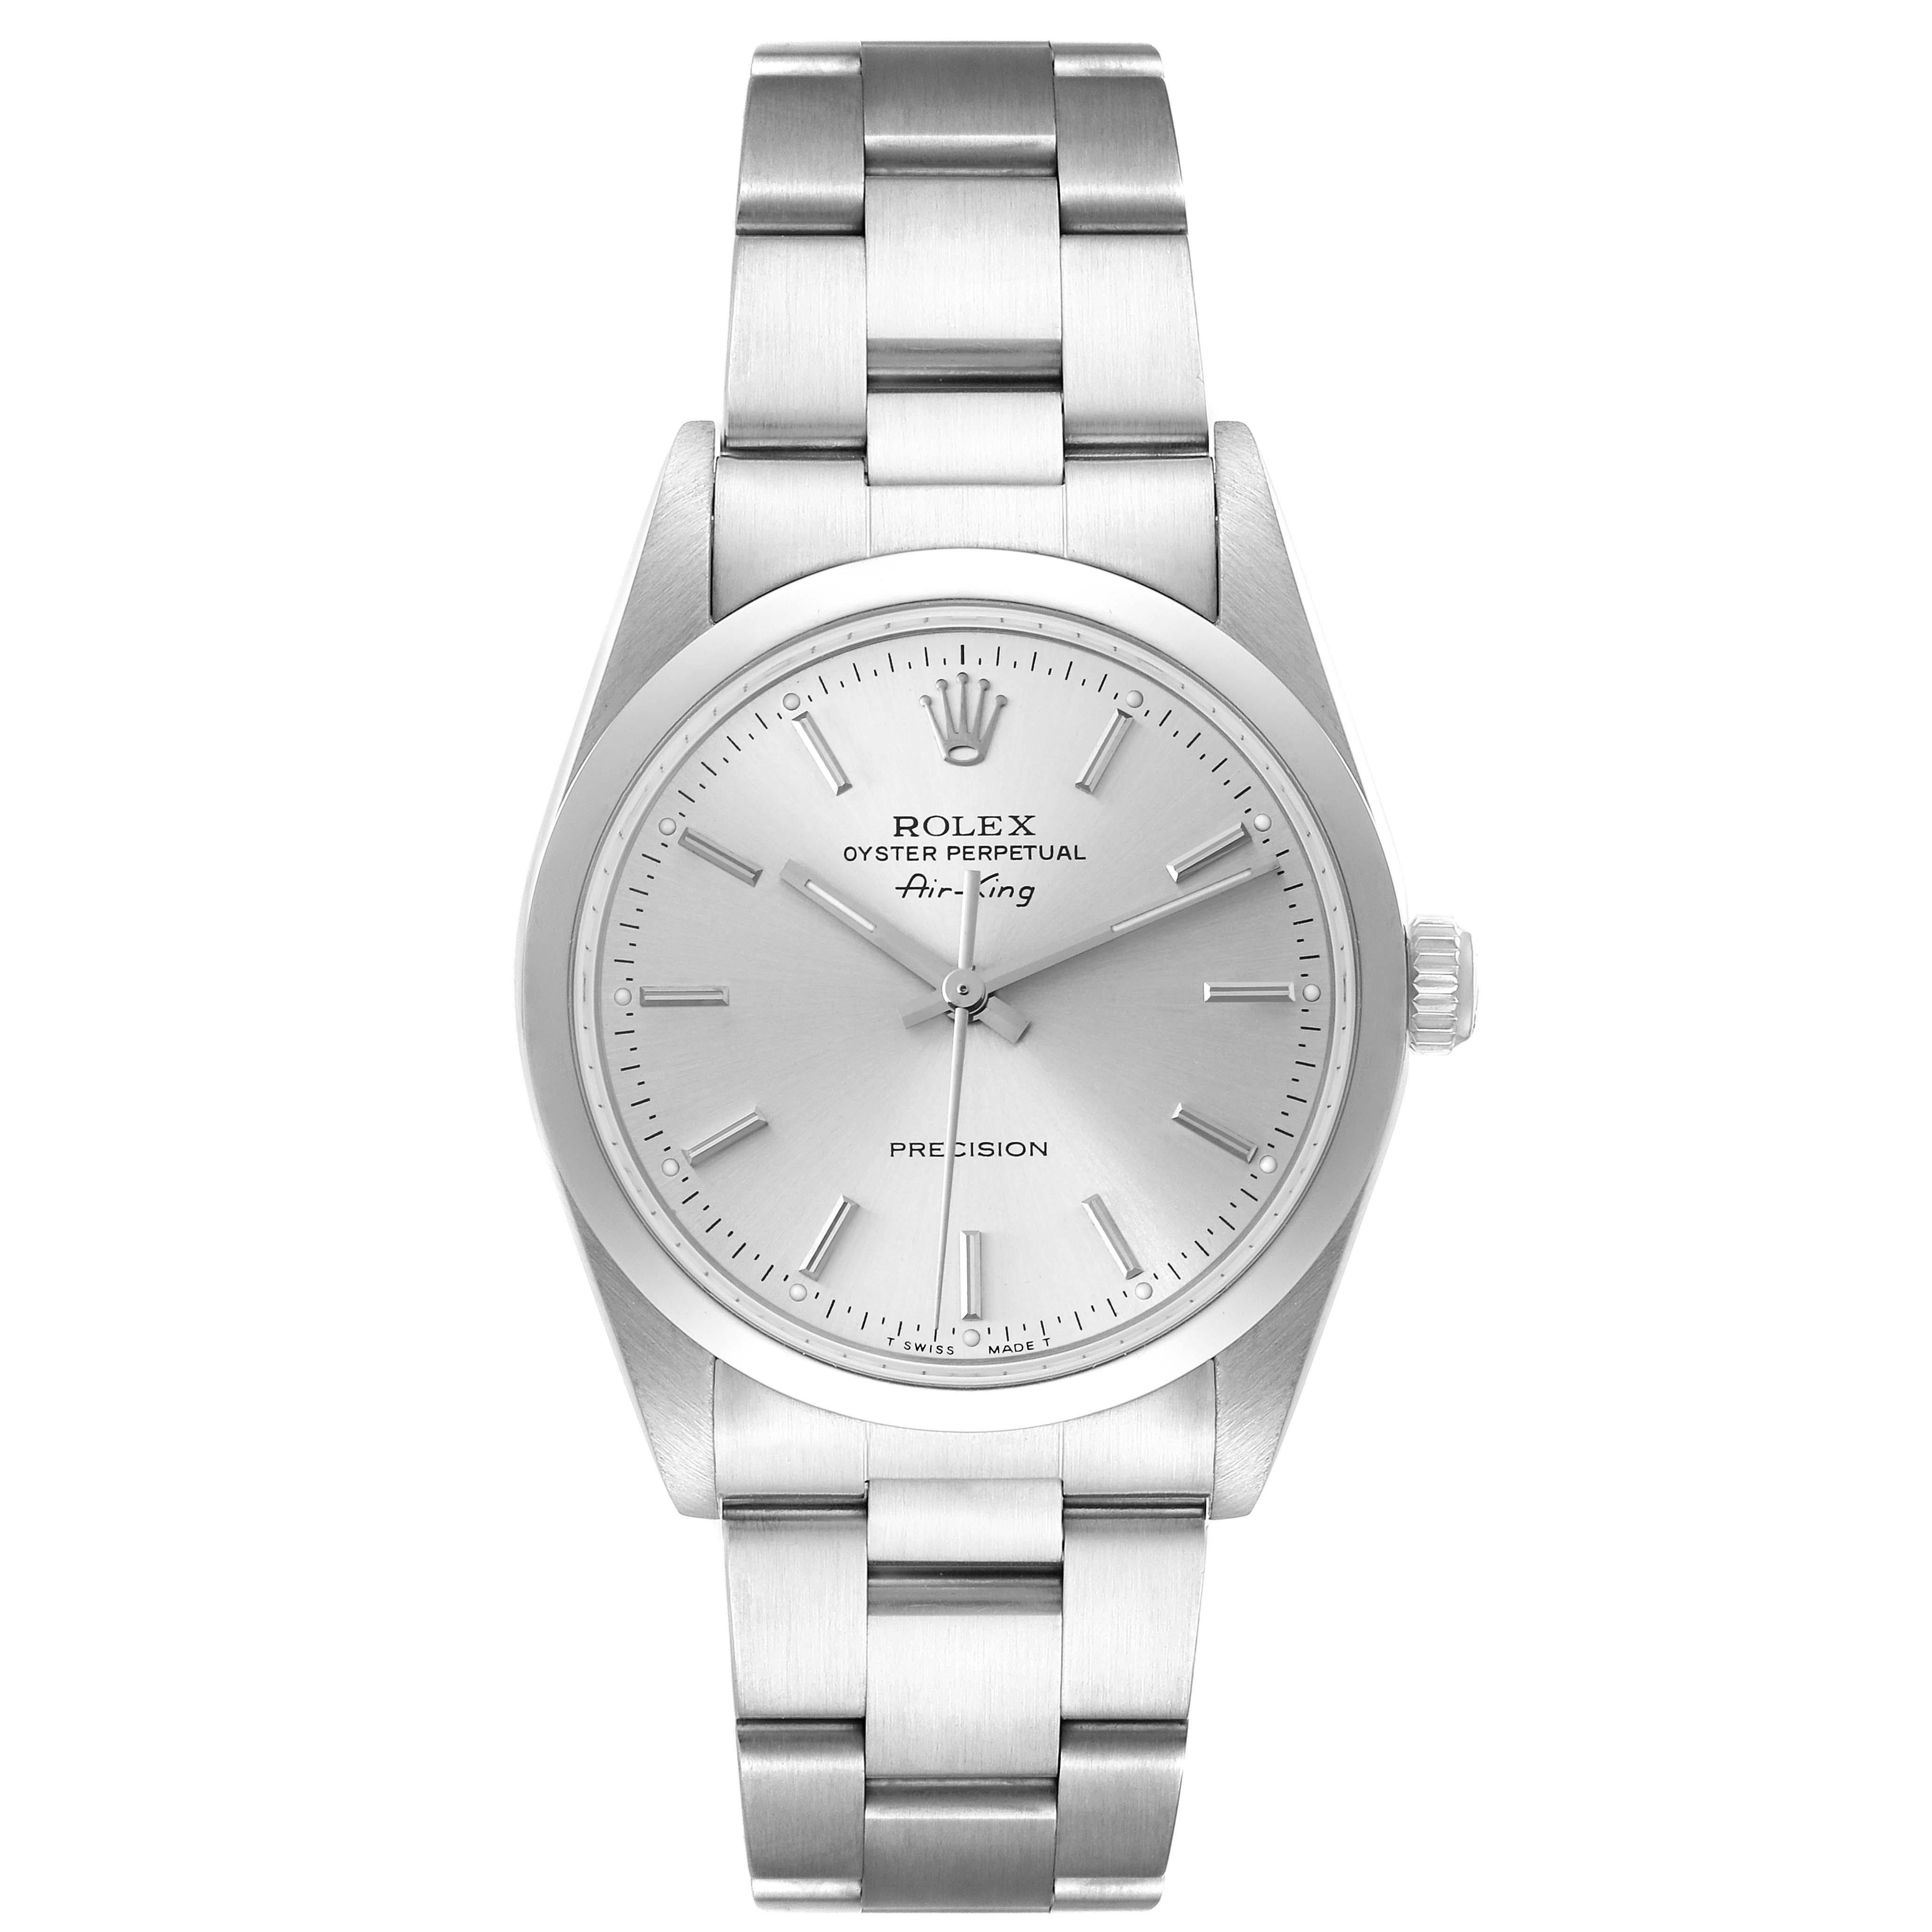 Rolex Air King Silver Dial Smooth Bezel Steel Mens Watch 14000. Automatic self-winding movement. Stainless steel case 34 mm in diameter. Rolex logo on the crown. Stainless steel smooth bezel. Scratch resistant sapphire crystal. Silver dial with